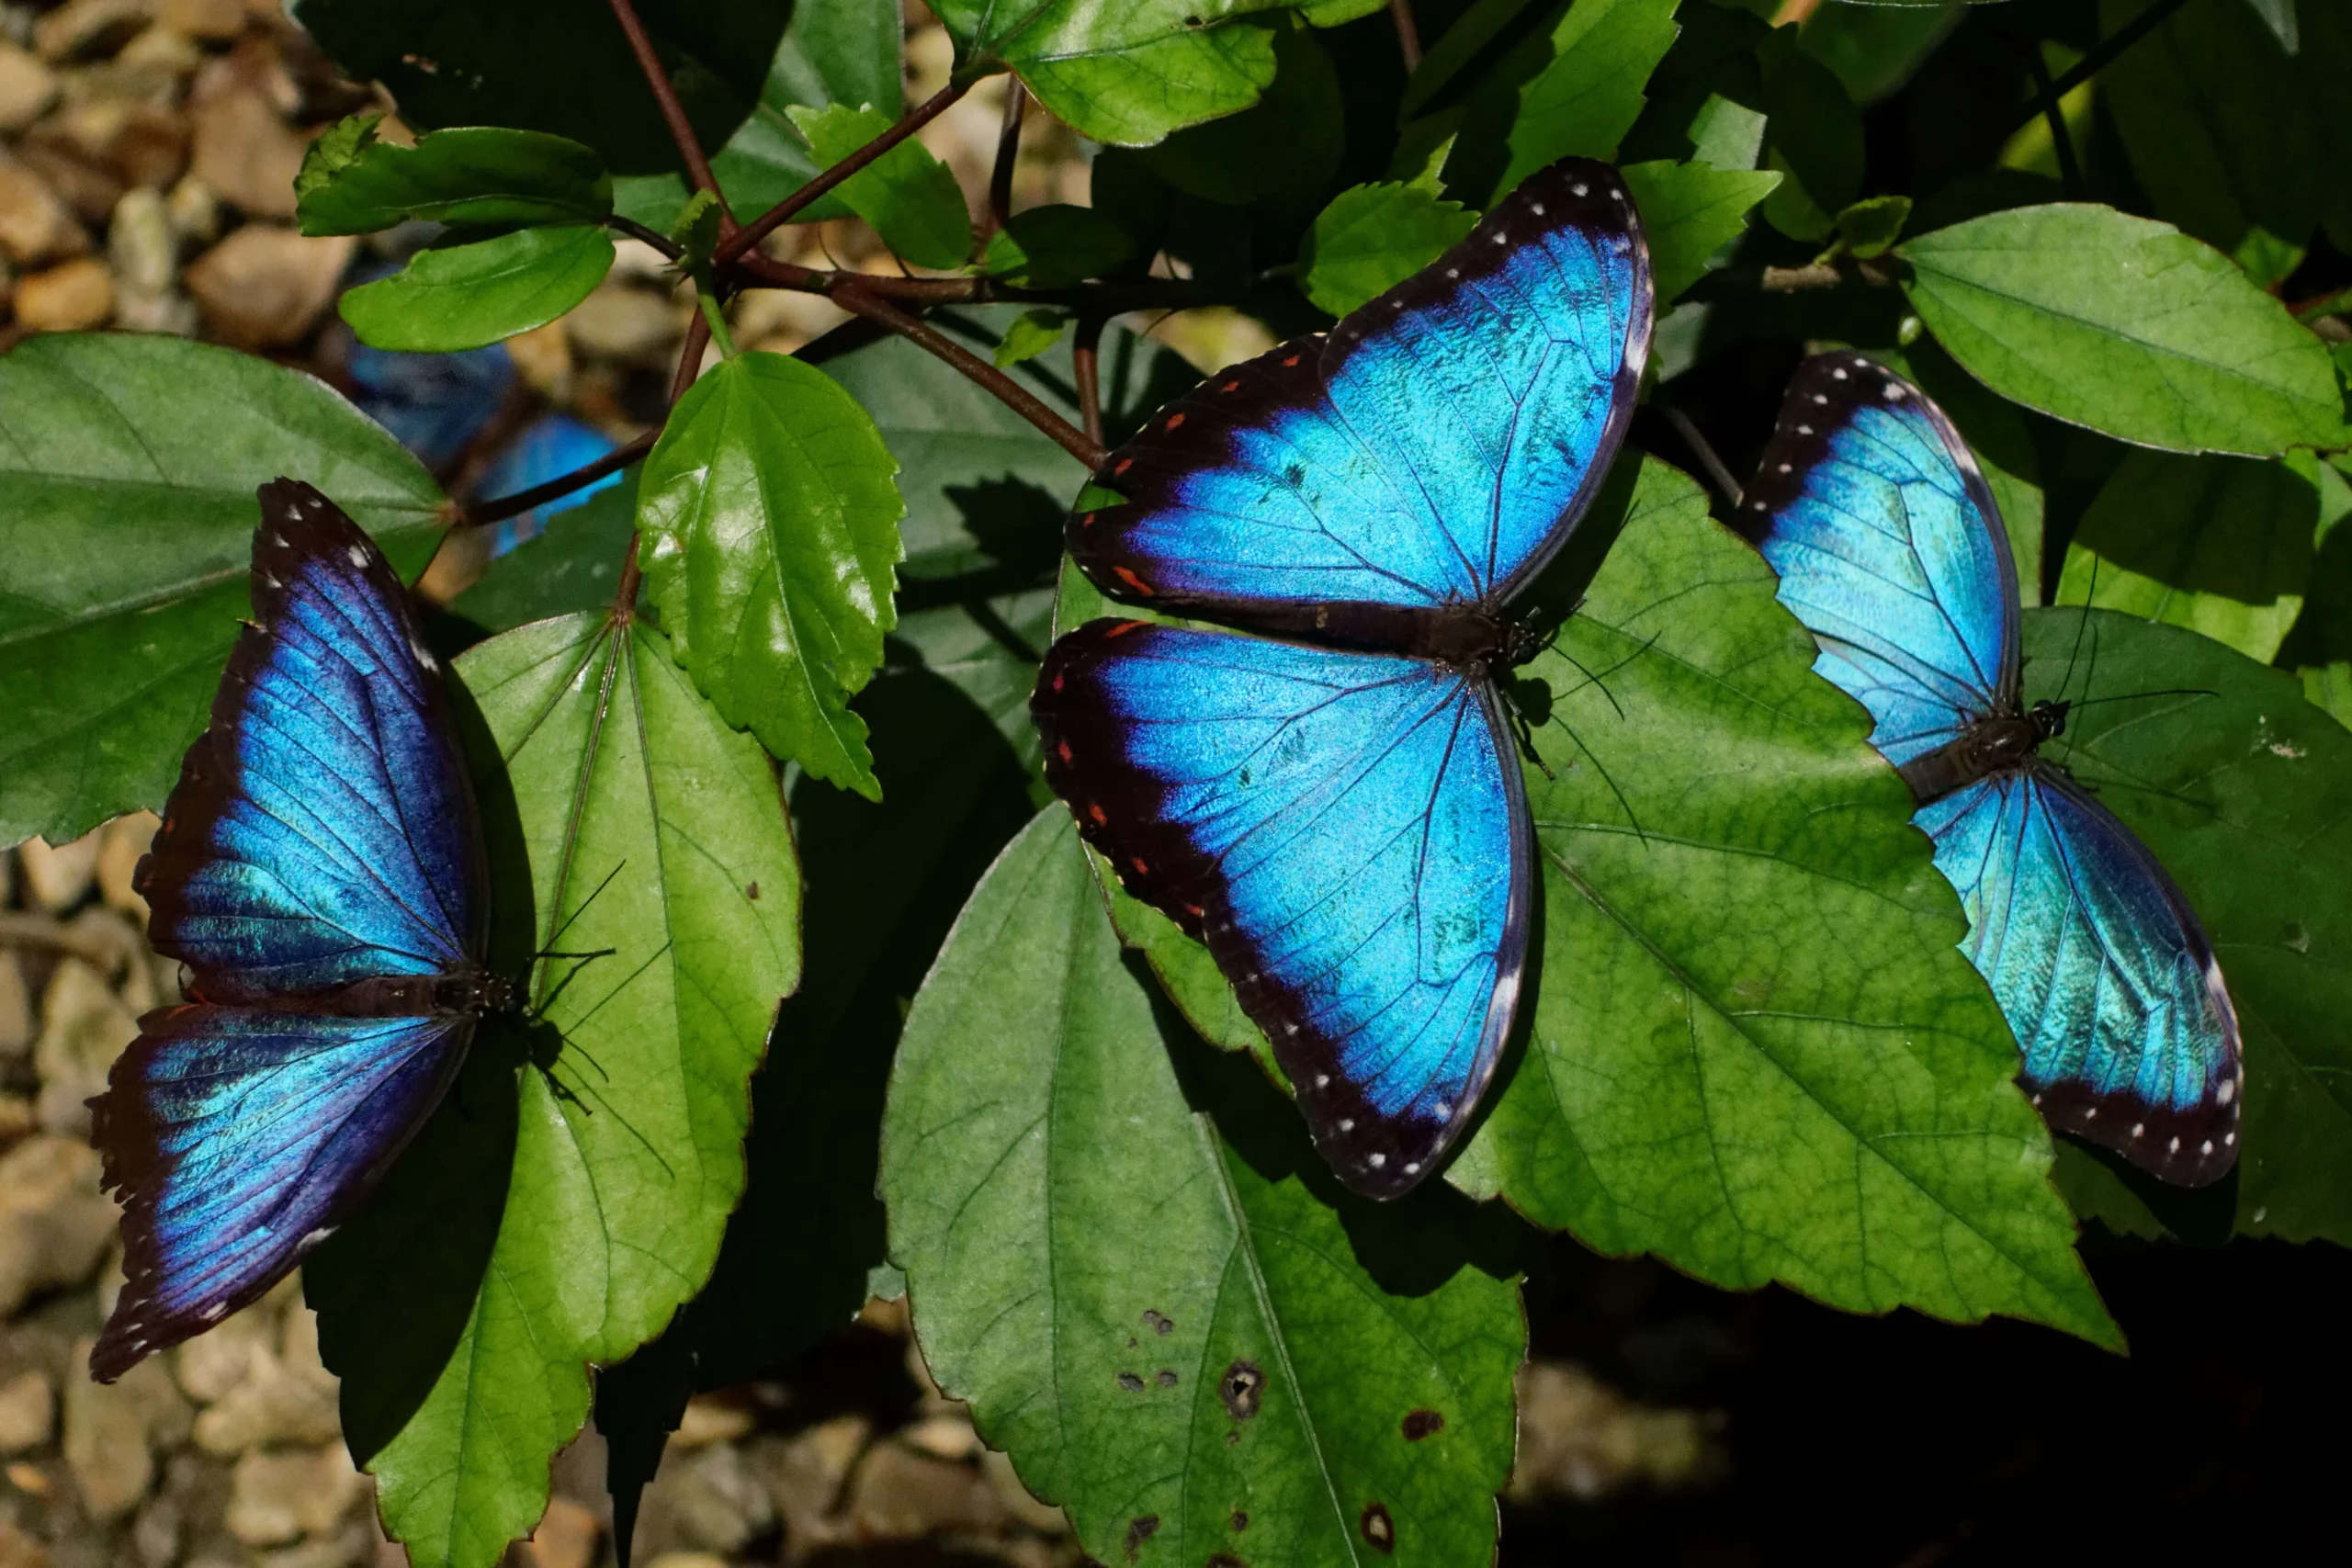 Blue Morpho Butterflies sitting on the leaves